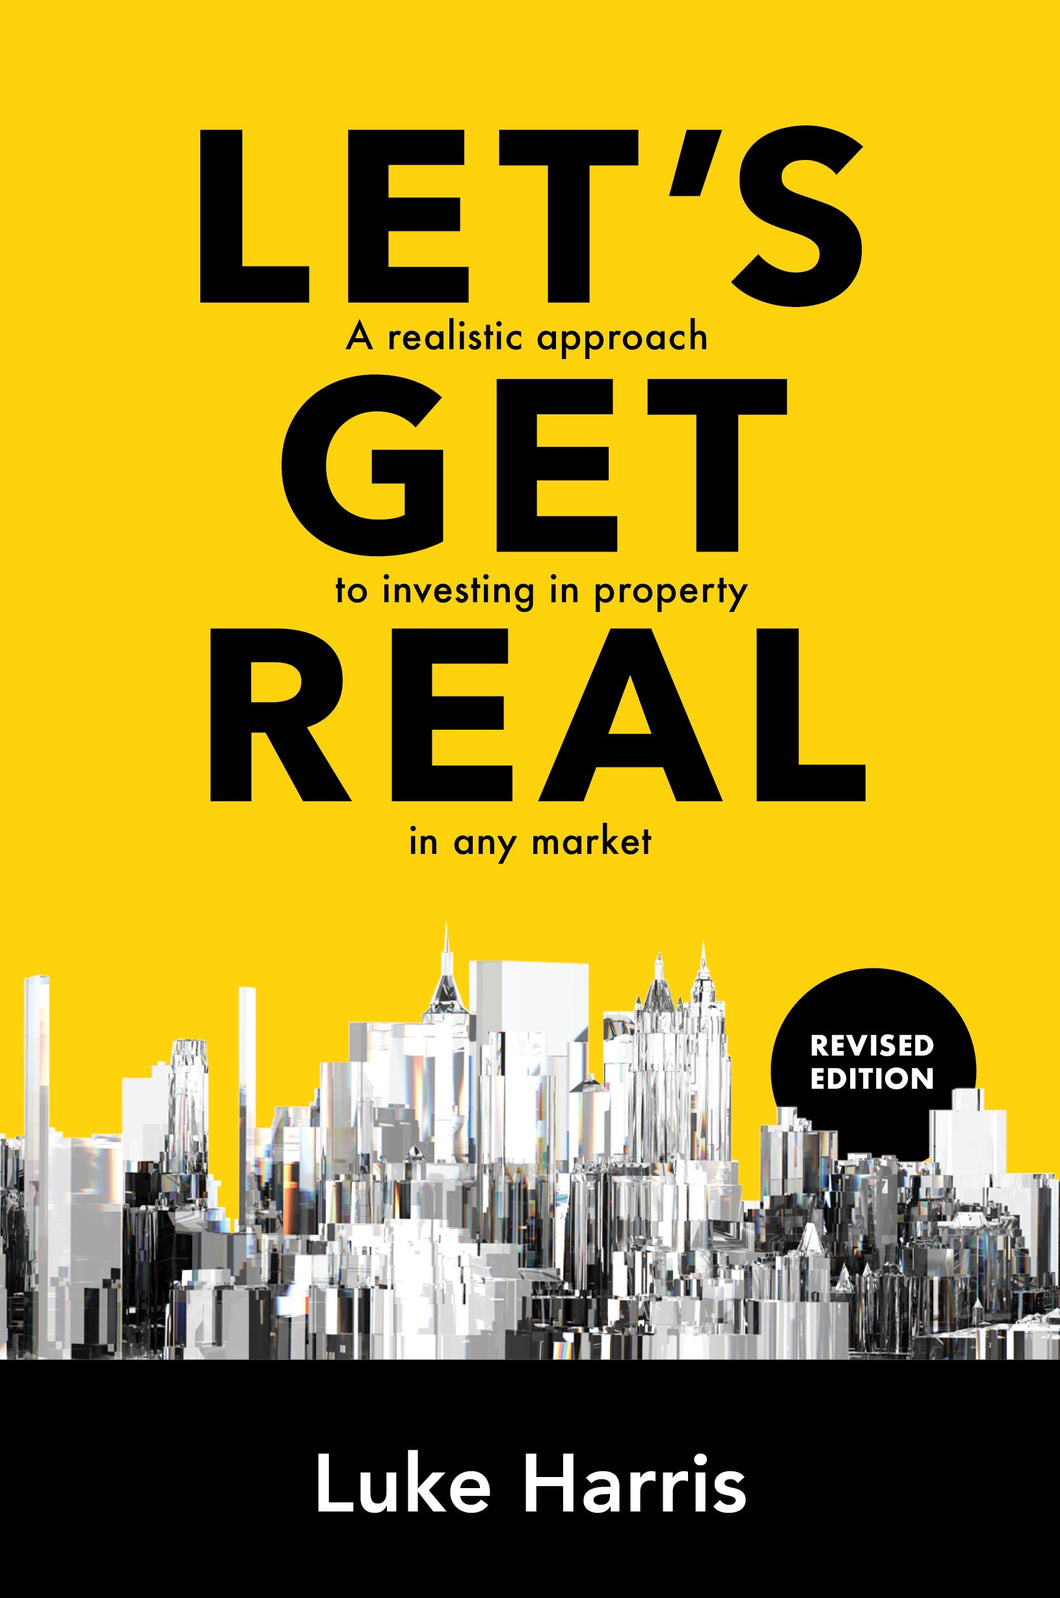 Let's Get Real: Revised Edition <br><i><small>by Luke Harris</br></i></small>